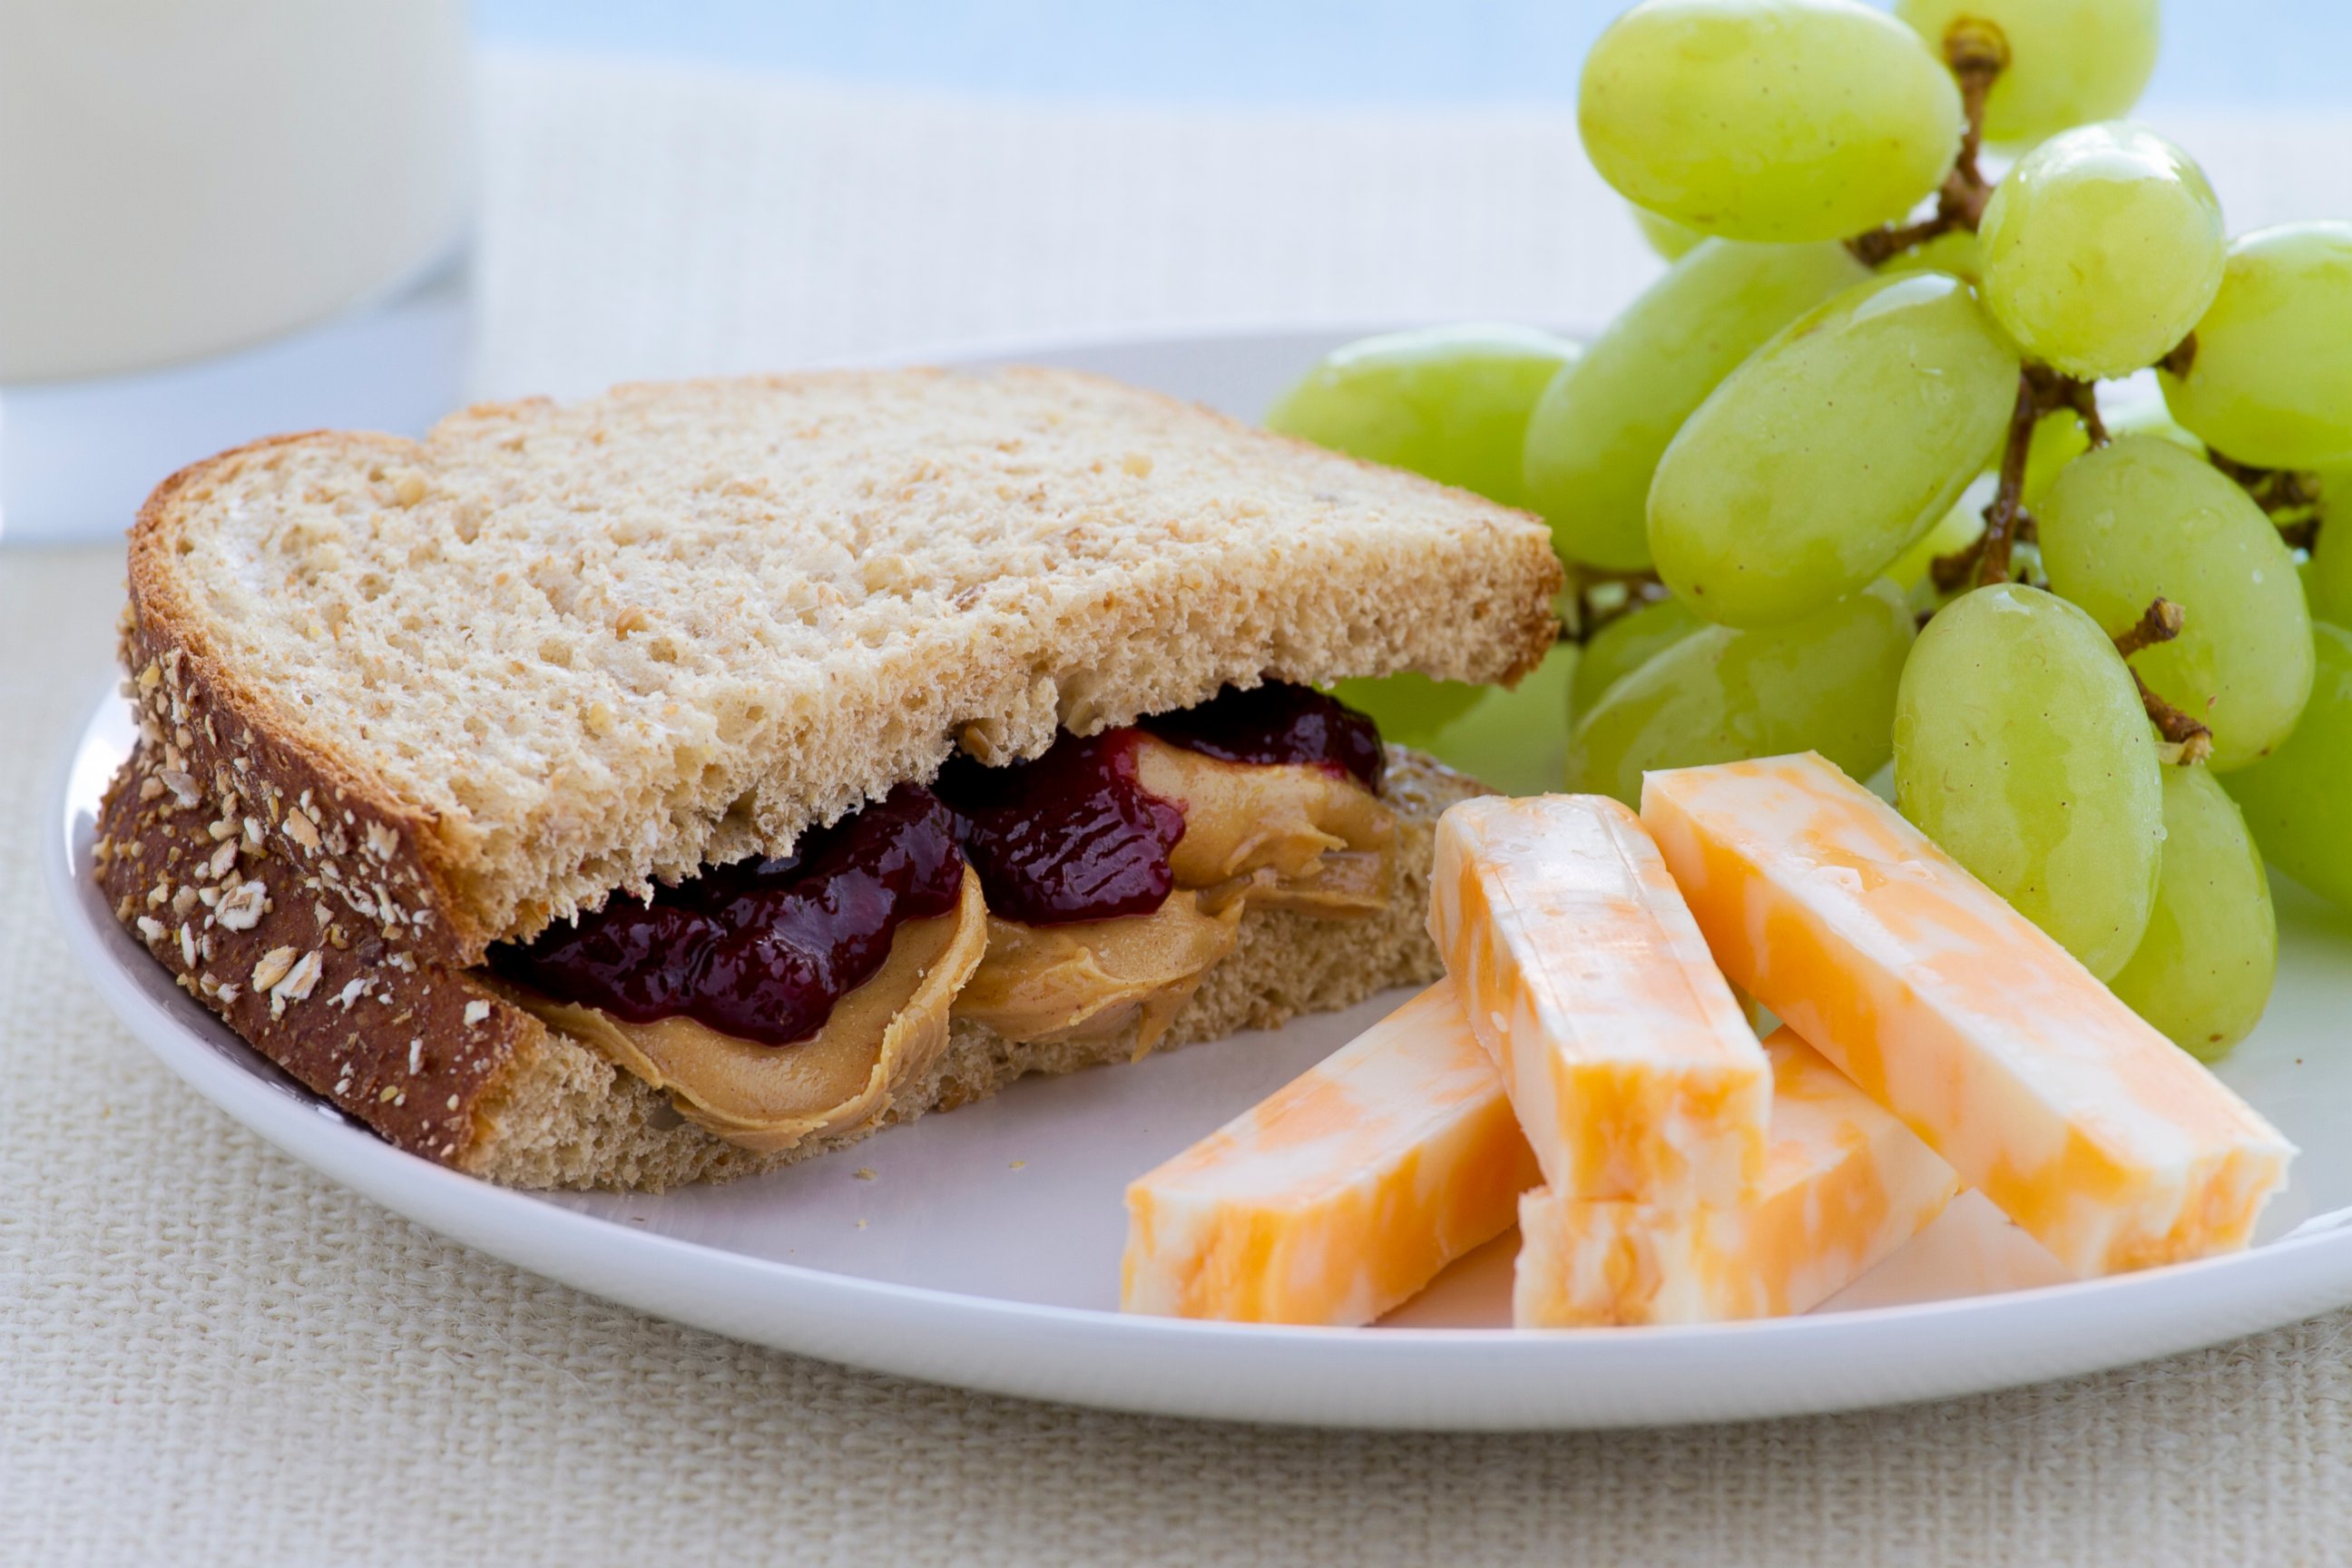 PHOTO: Some schools are banning peanut butter and jelly sandwiches due to allergy concerns.